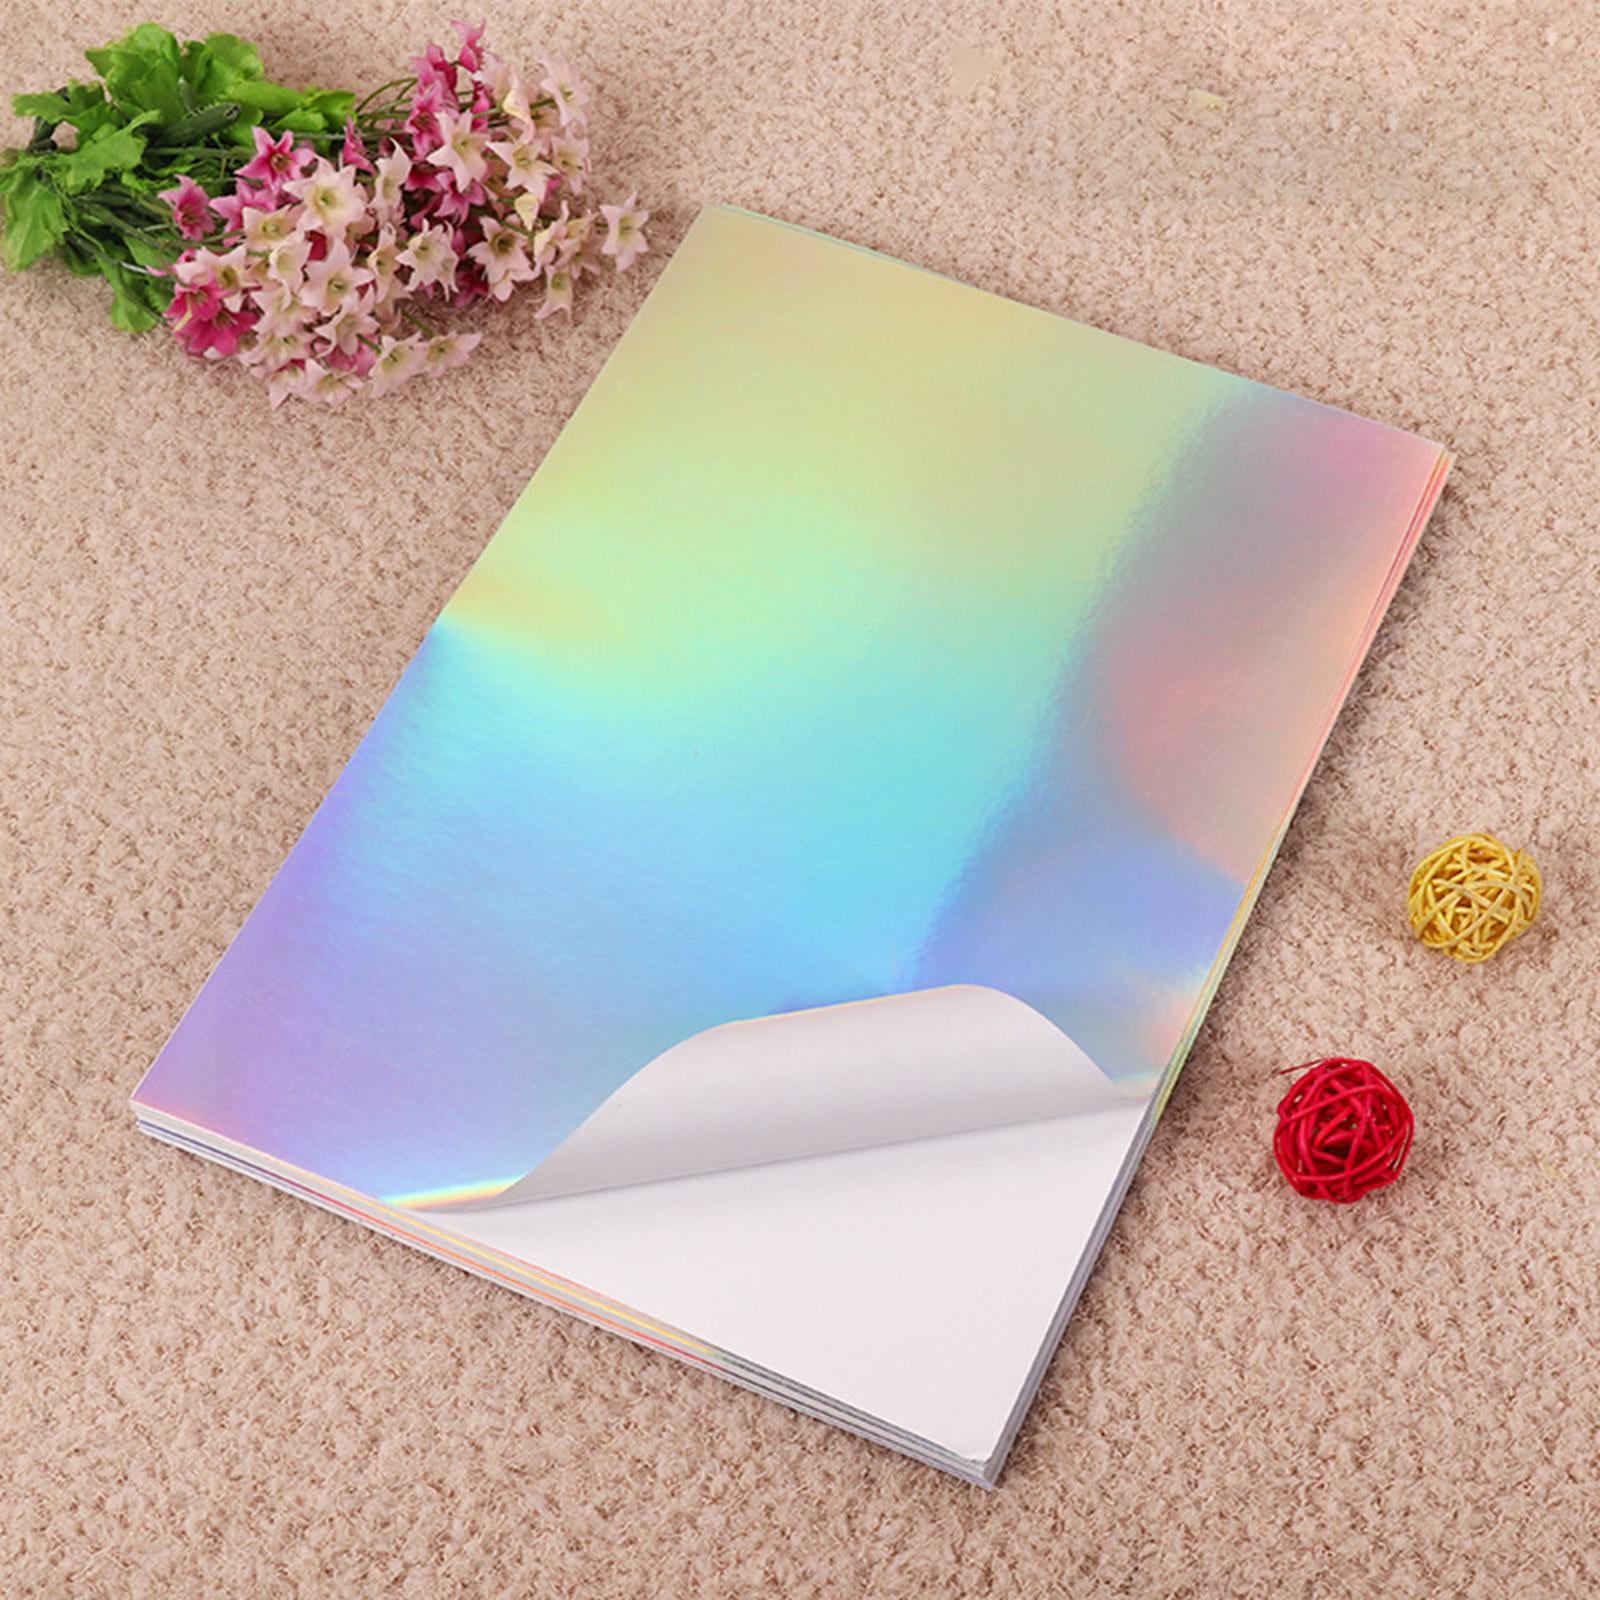 Brand/Source for large Holographic Cardstock? : r/SCREENPRINTING